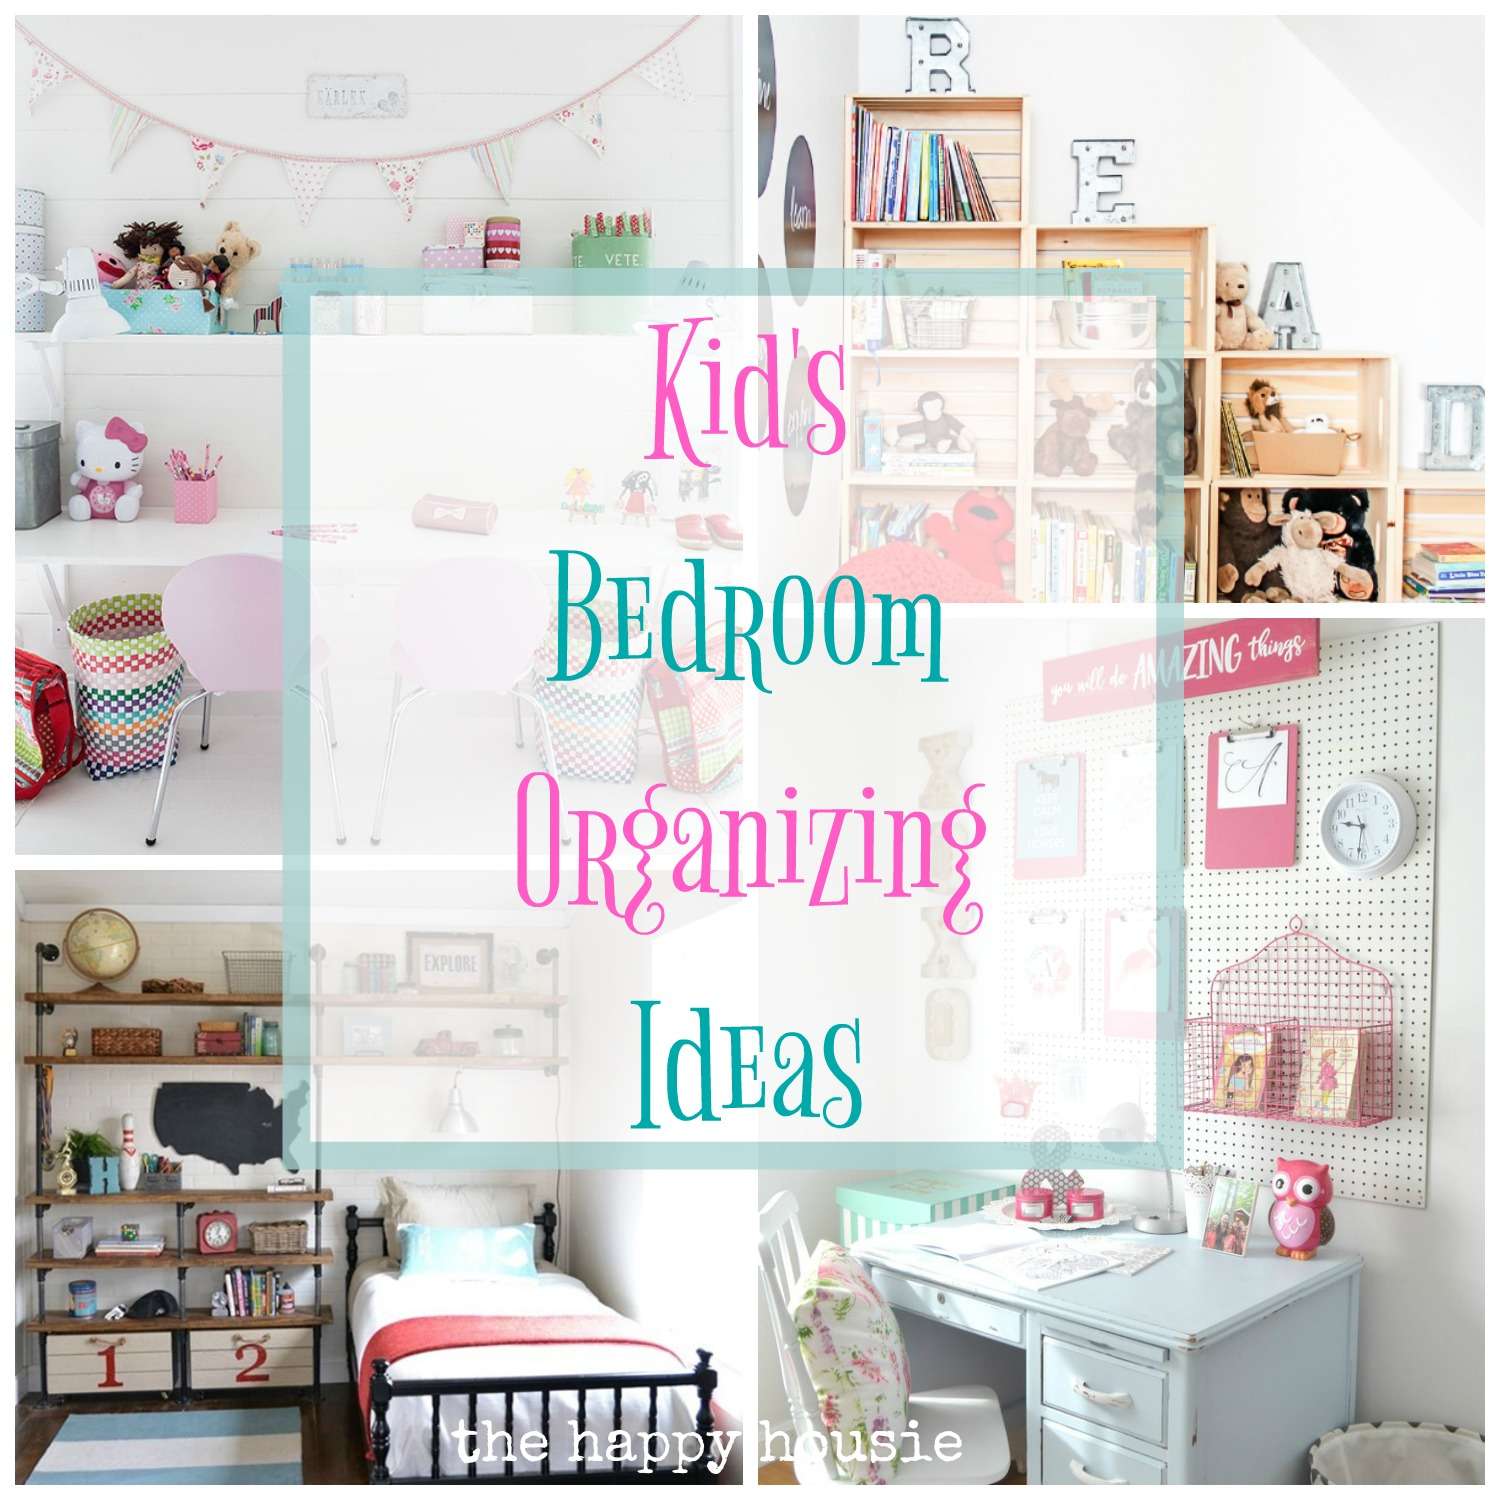 10 Fabulous Organizing Ideas For Kids Rooms fantastic ideas for organizing kids bedrooms the happy housie 2022